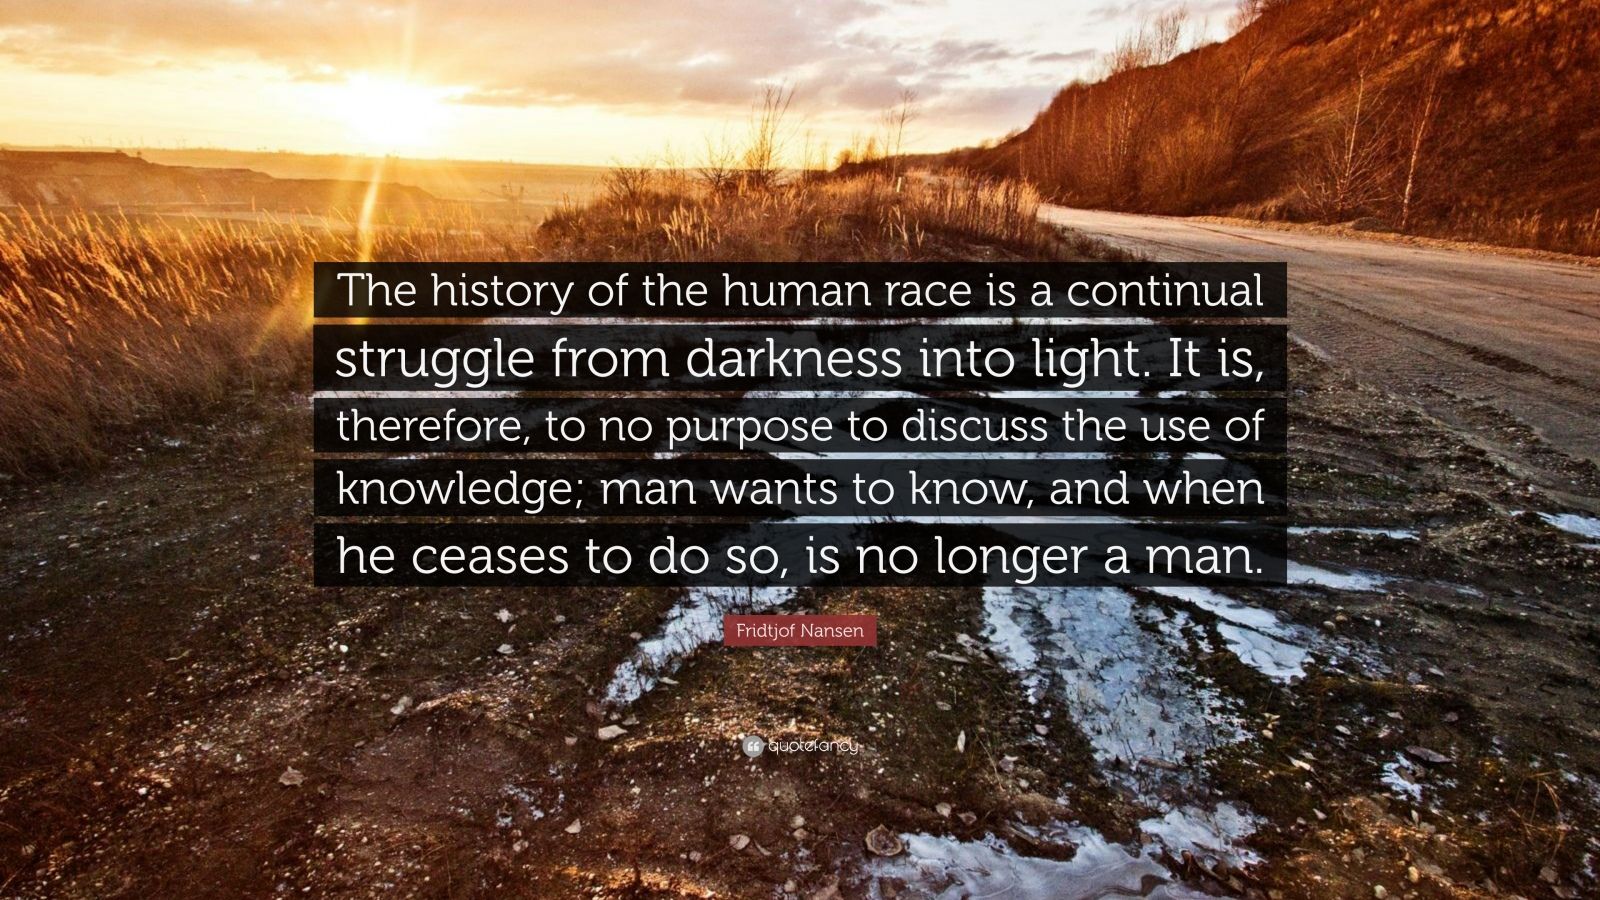 Fridtjof Nansen Quote: “The history of the human race is a continual